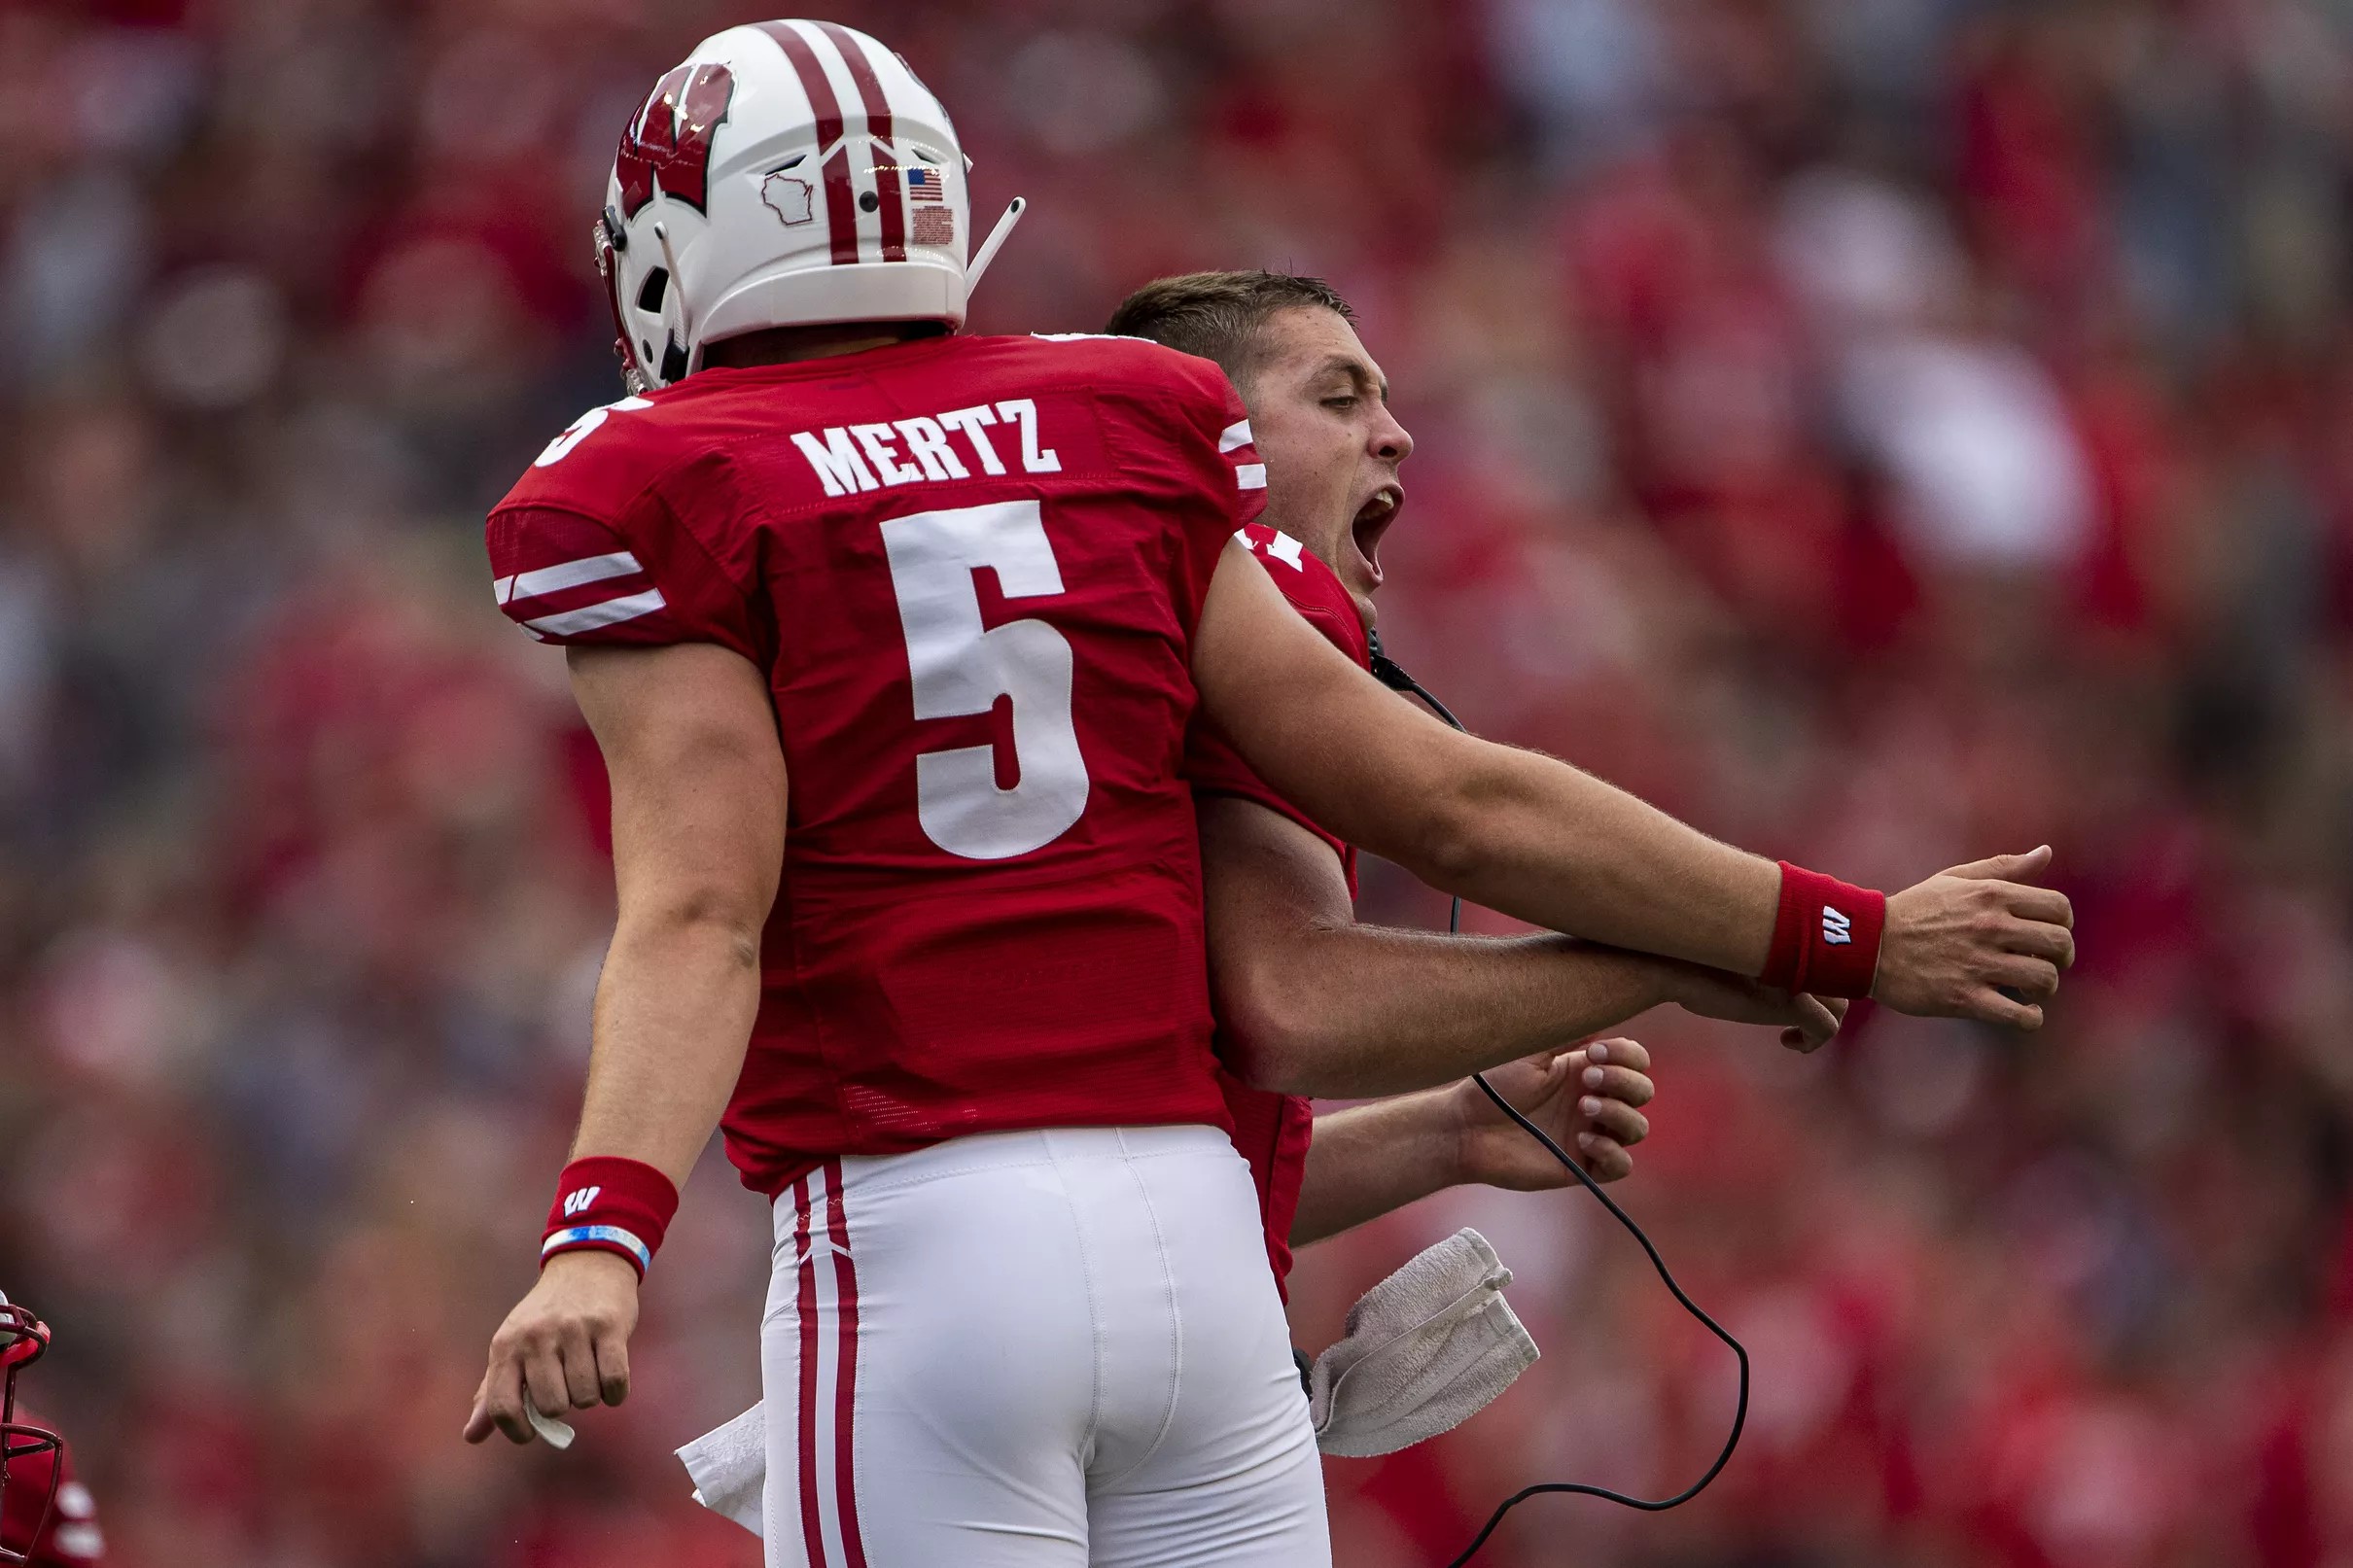 Wisconsin football: the Badgers climb in the polls despite not playing